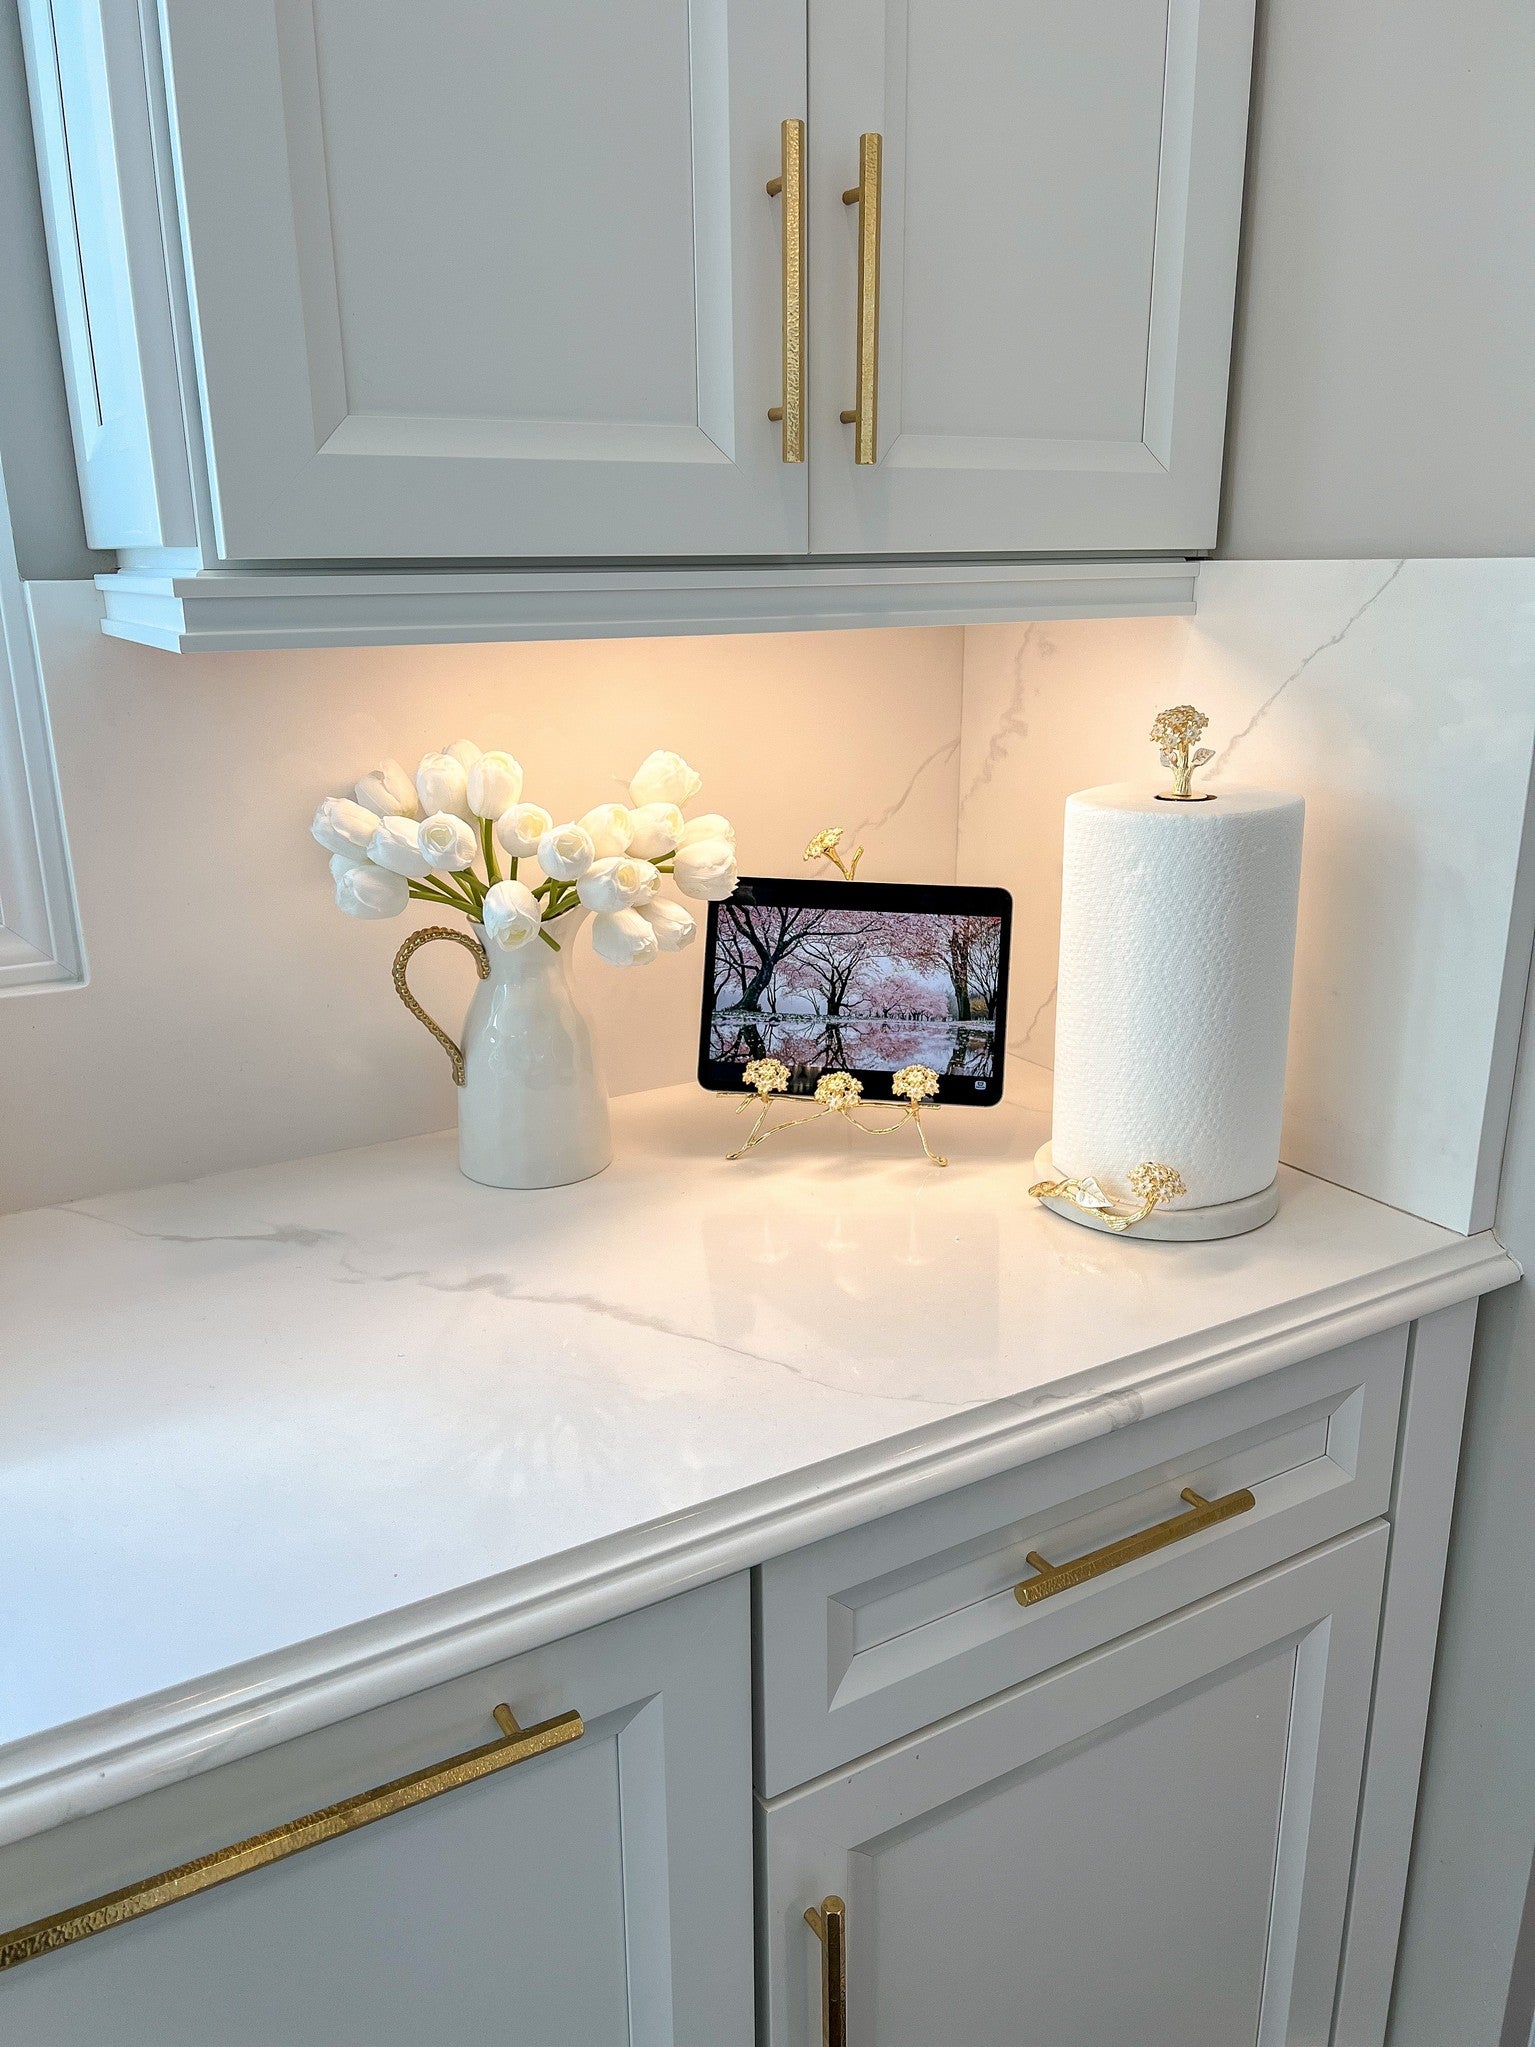 https://www.inspiremehomedecor.shop/wp-content/uploads/1688/10/find-the-best-prices-on-gold-paper-towel-holder-with-marble-base-from-the-hydrangea-collection-inspire-me-home-decor_3.jpg